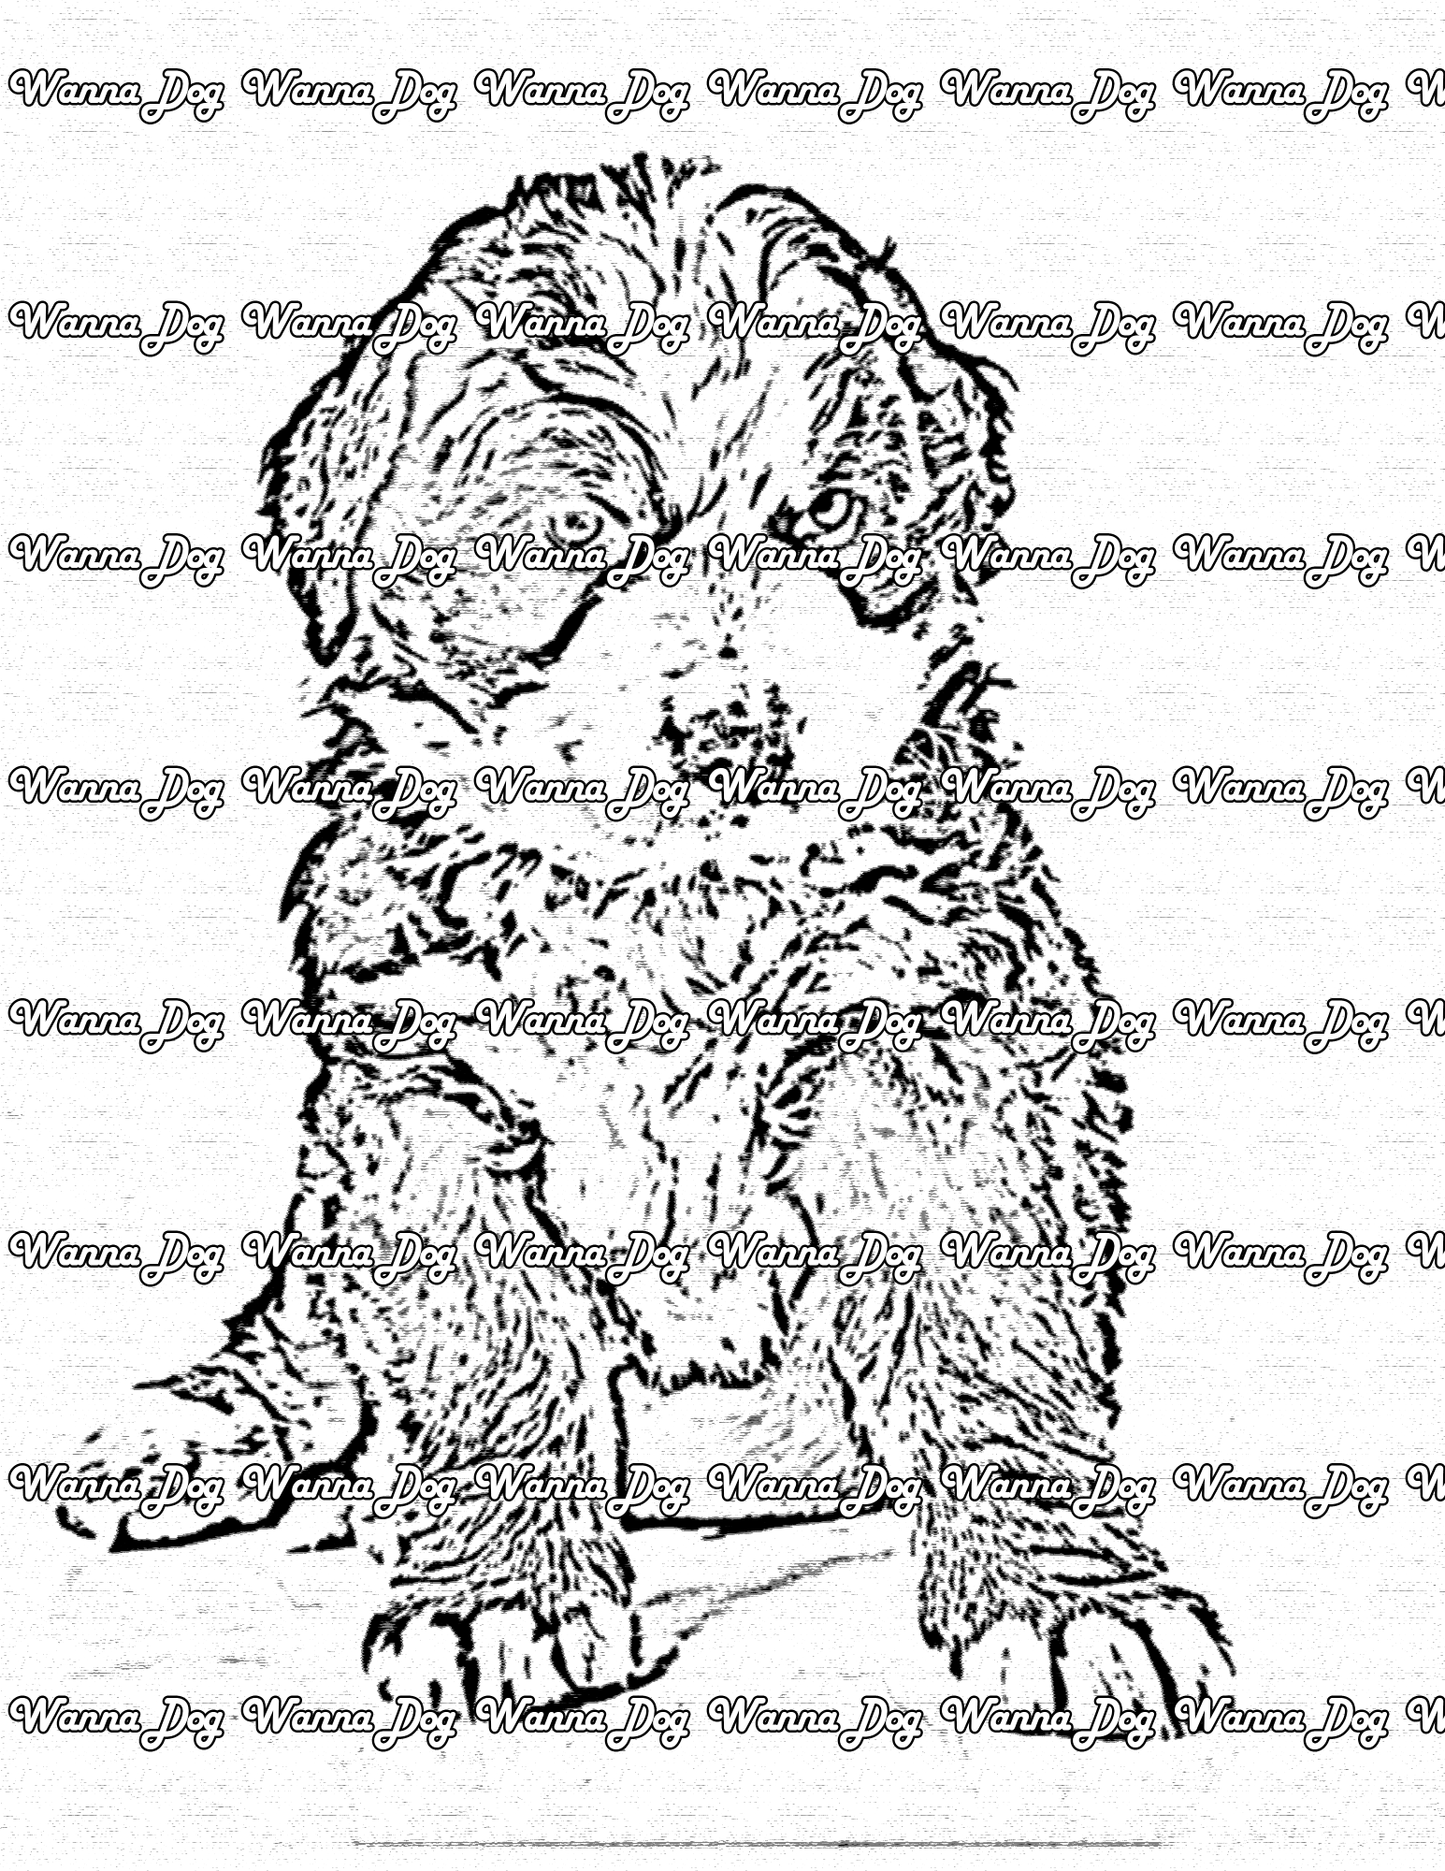 Bernese Mountain Dog Coloring Page of a Bernese Mountain Dog puppy sitting and posing